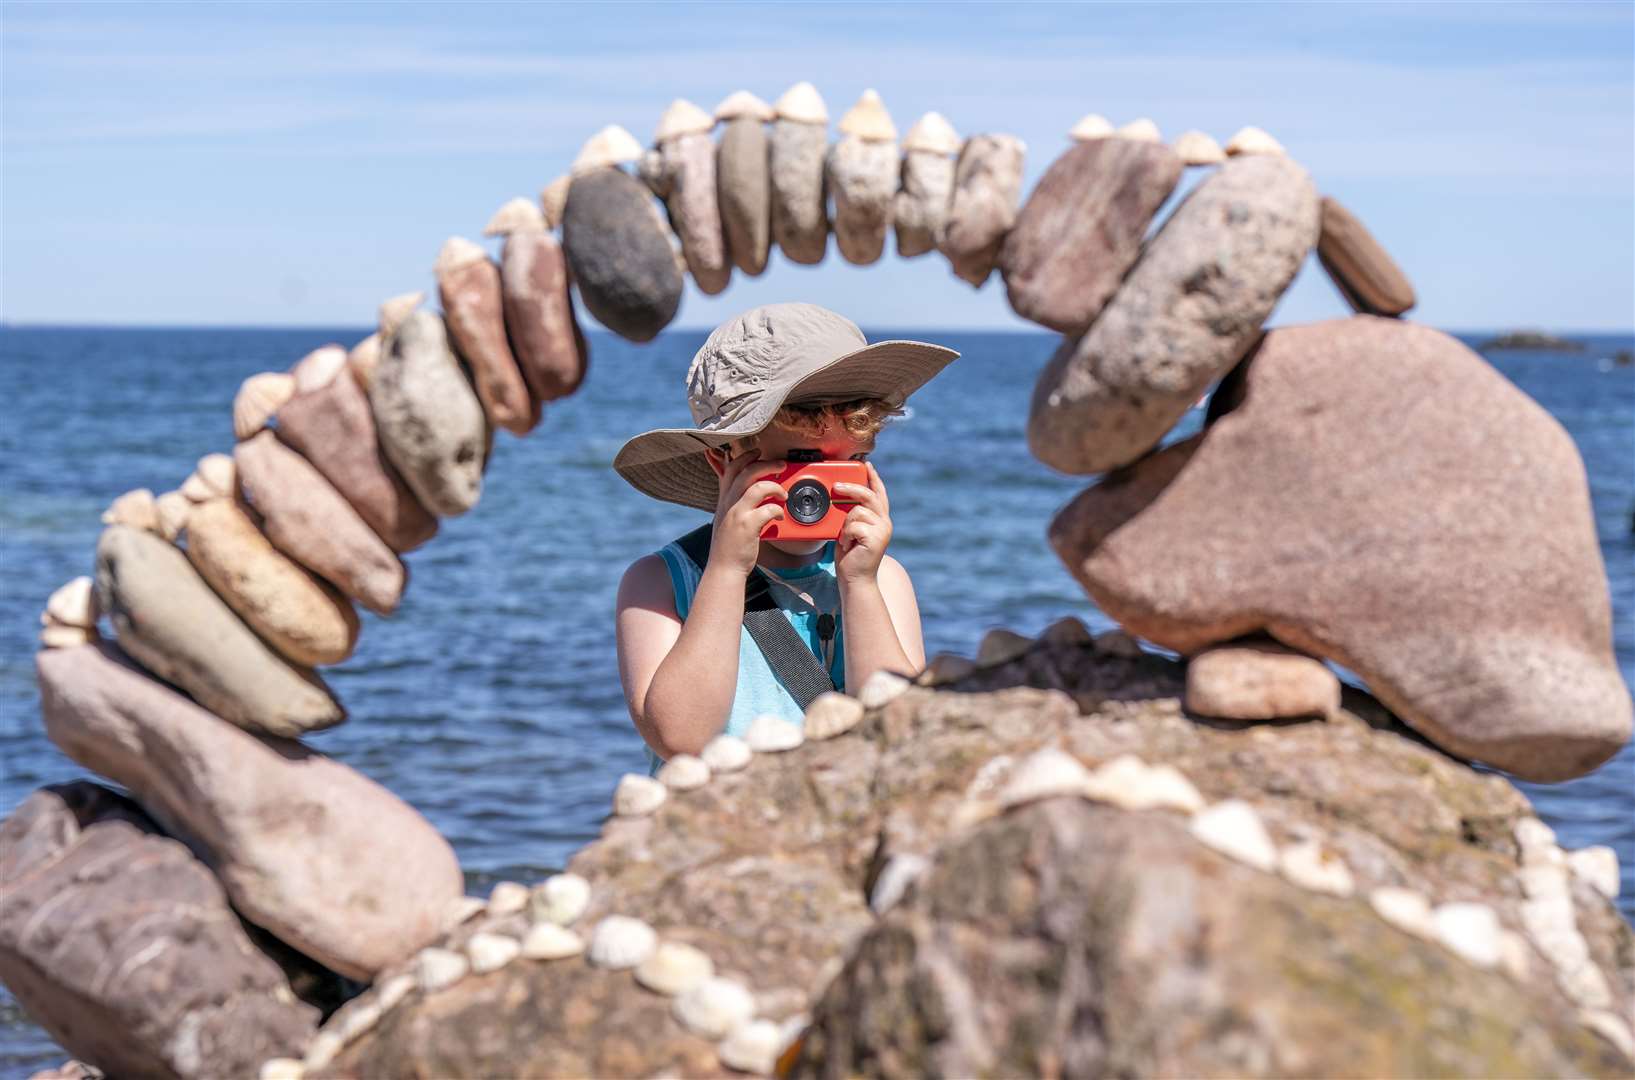 Angus Badenhorst, five, took a photograph of one of the amazing stone arches created during the European Stone Stacking Championships at Dunbar, East Lothian, in July (Jane Barlow/PA)